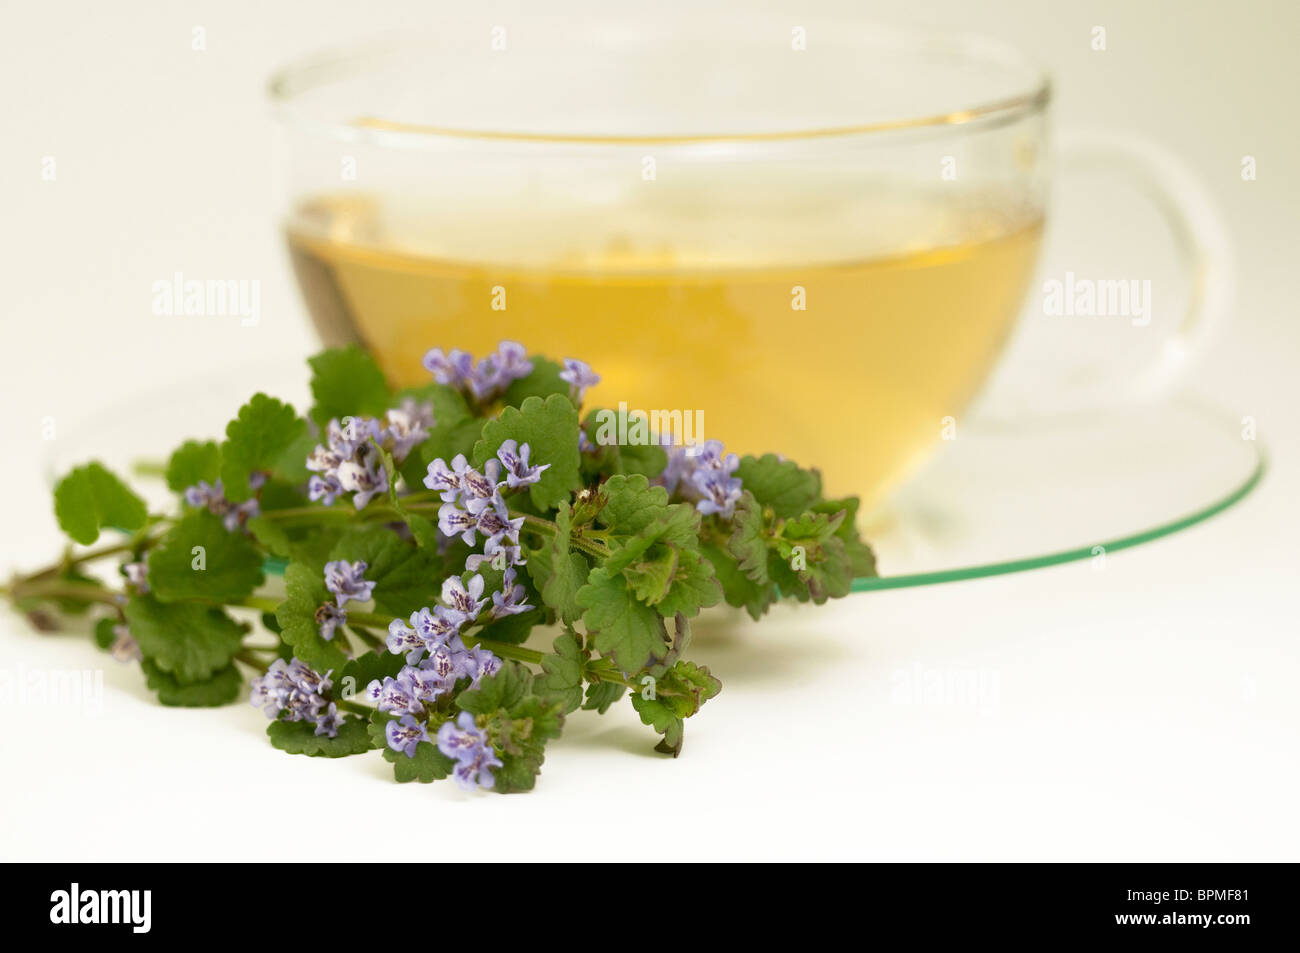 Ground Ivy (Glechoma hederaceum). A cup of infusion with flowering stalks, studio picture against a white background. Stock Photo